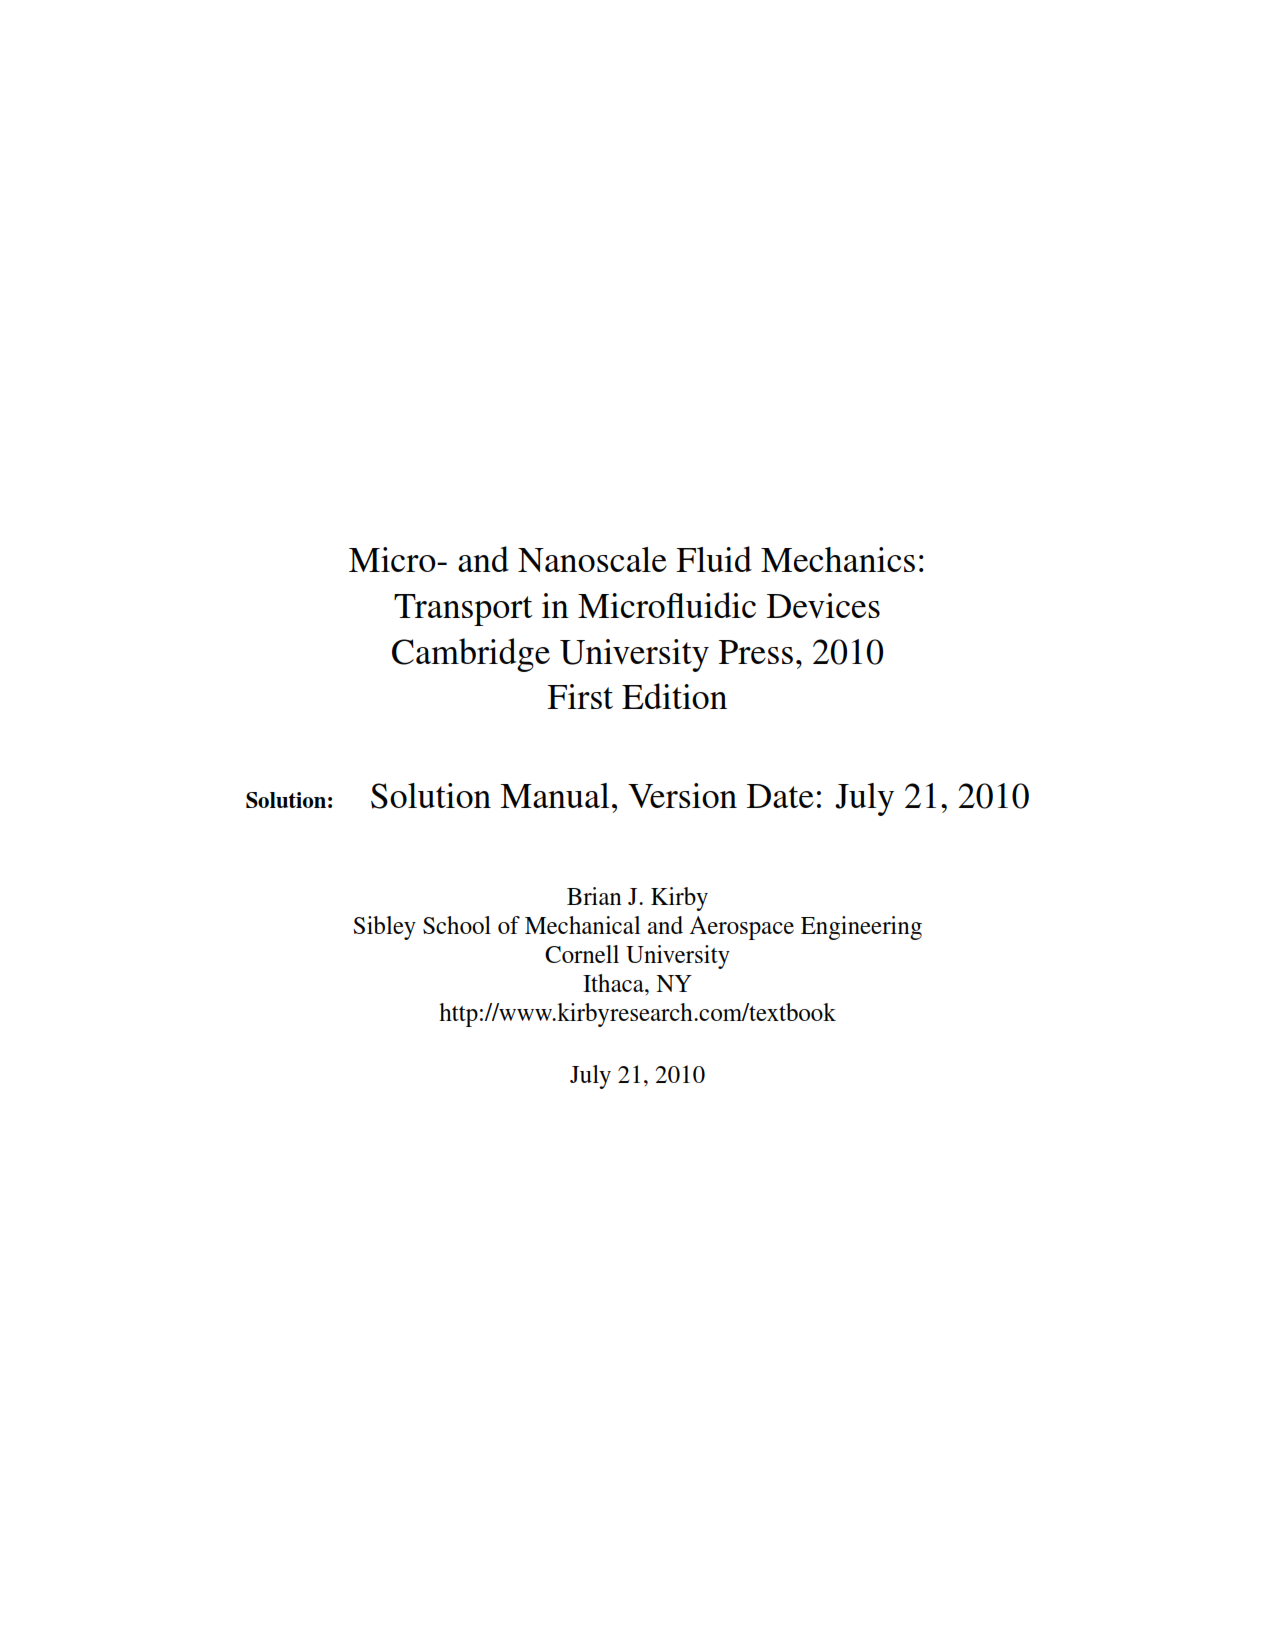 download free Micro and Nanoscale Fluid Mechanics Transport in Microfluidic Devices solution manual and answers eBook pdf